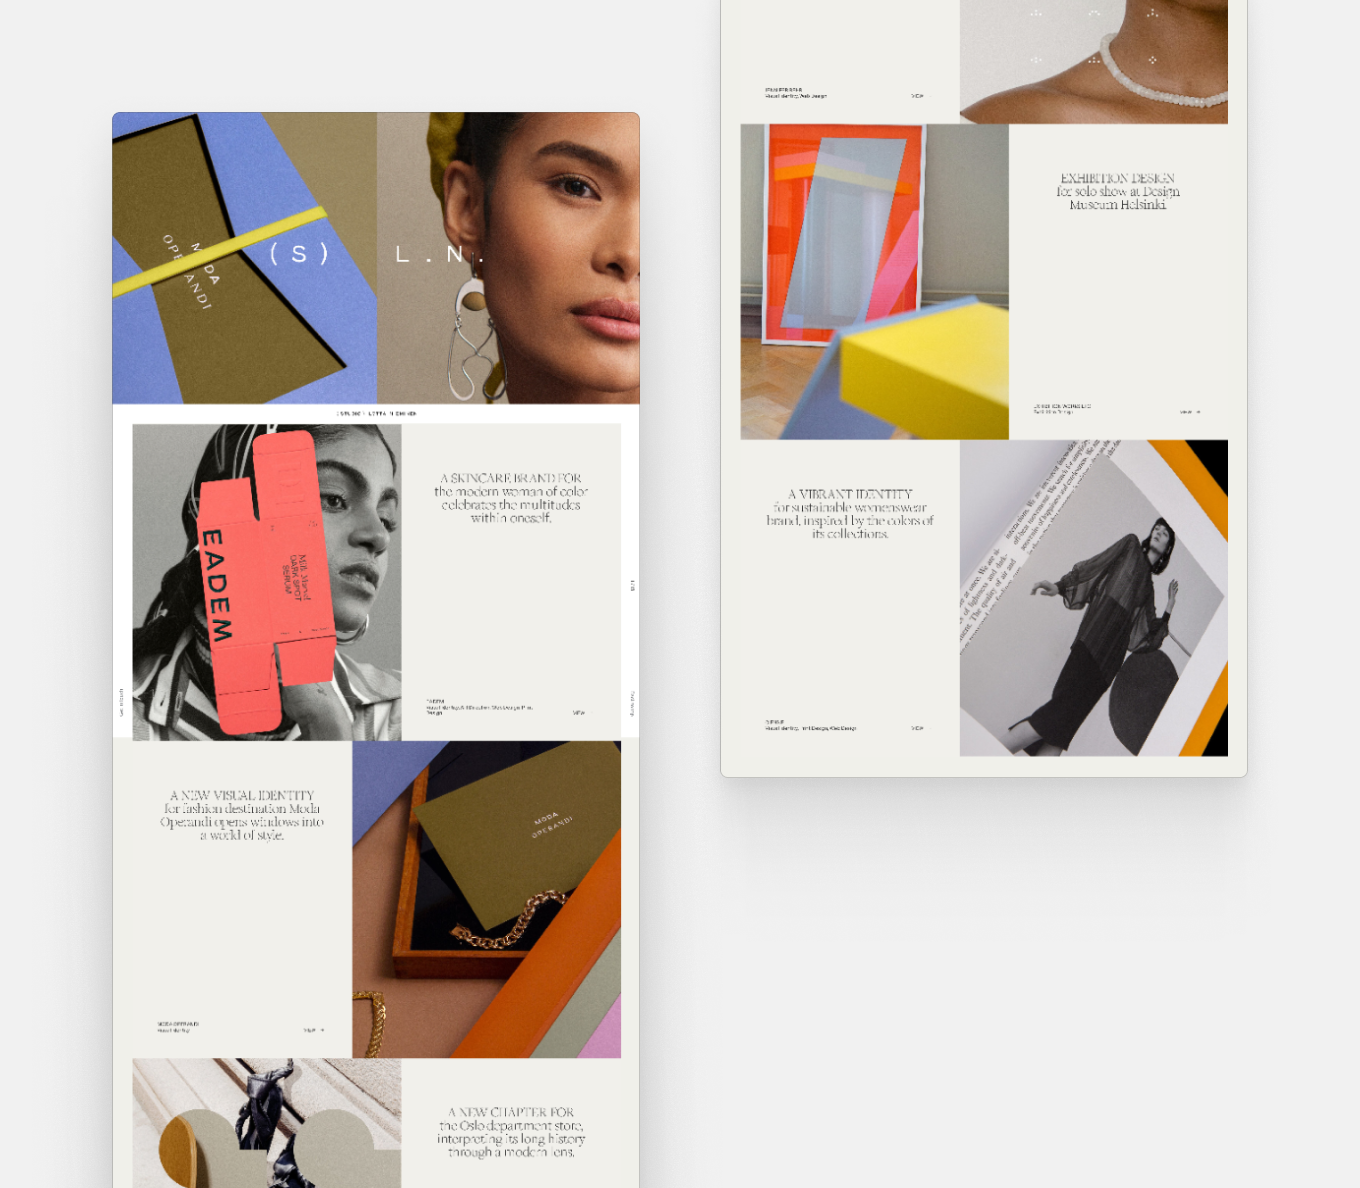 Picture of a portfolio with text on one side and large, colorful images on the other side.